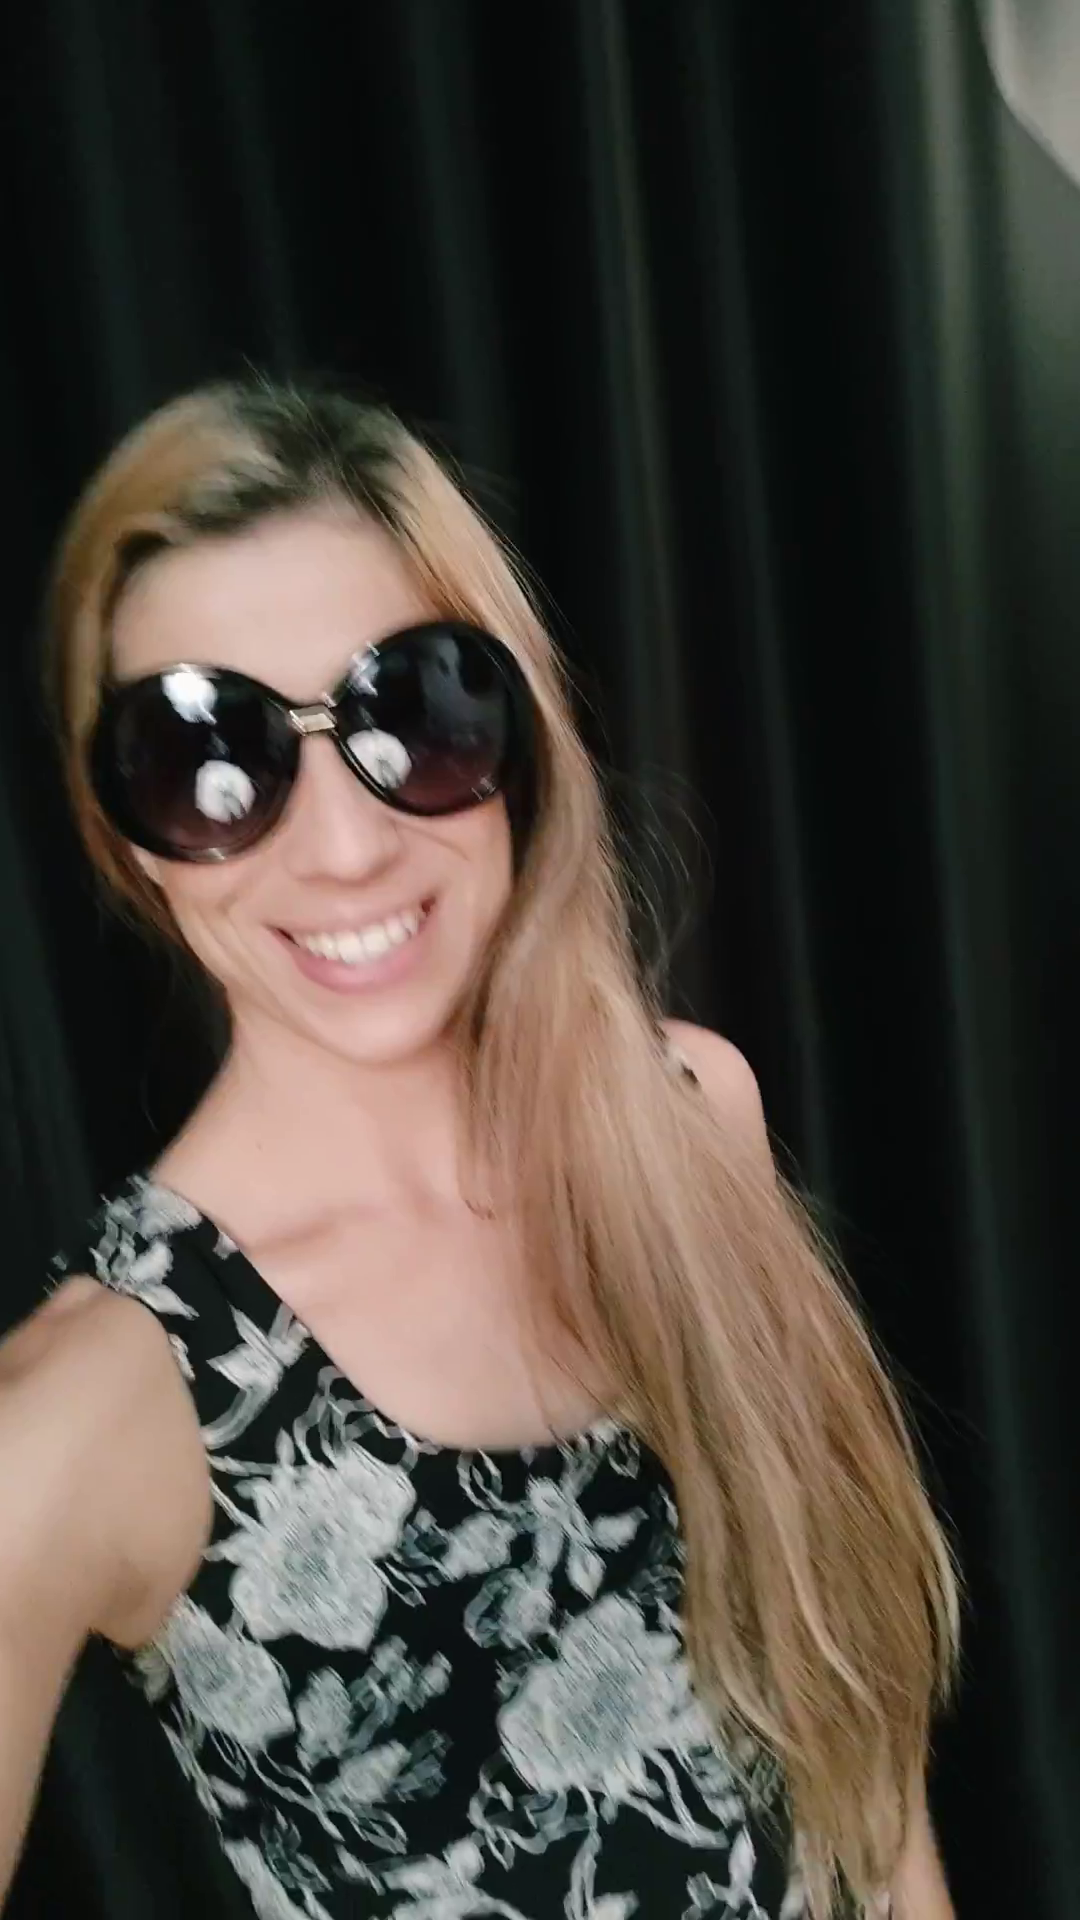 Video by Lettywild with the username @LettyWild, who is a star user,  November 4, 2019 at 3:31 PM. The post is about the topic Amateurs and the text says 'Lettywild'